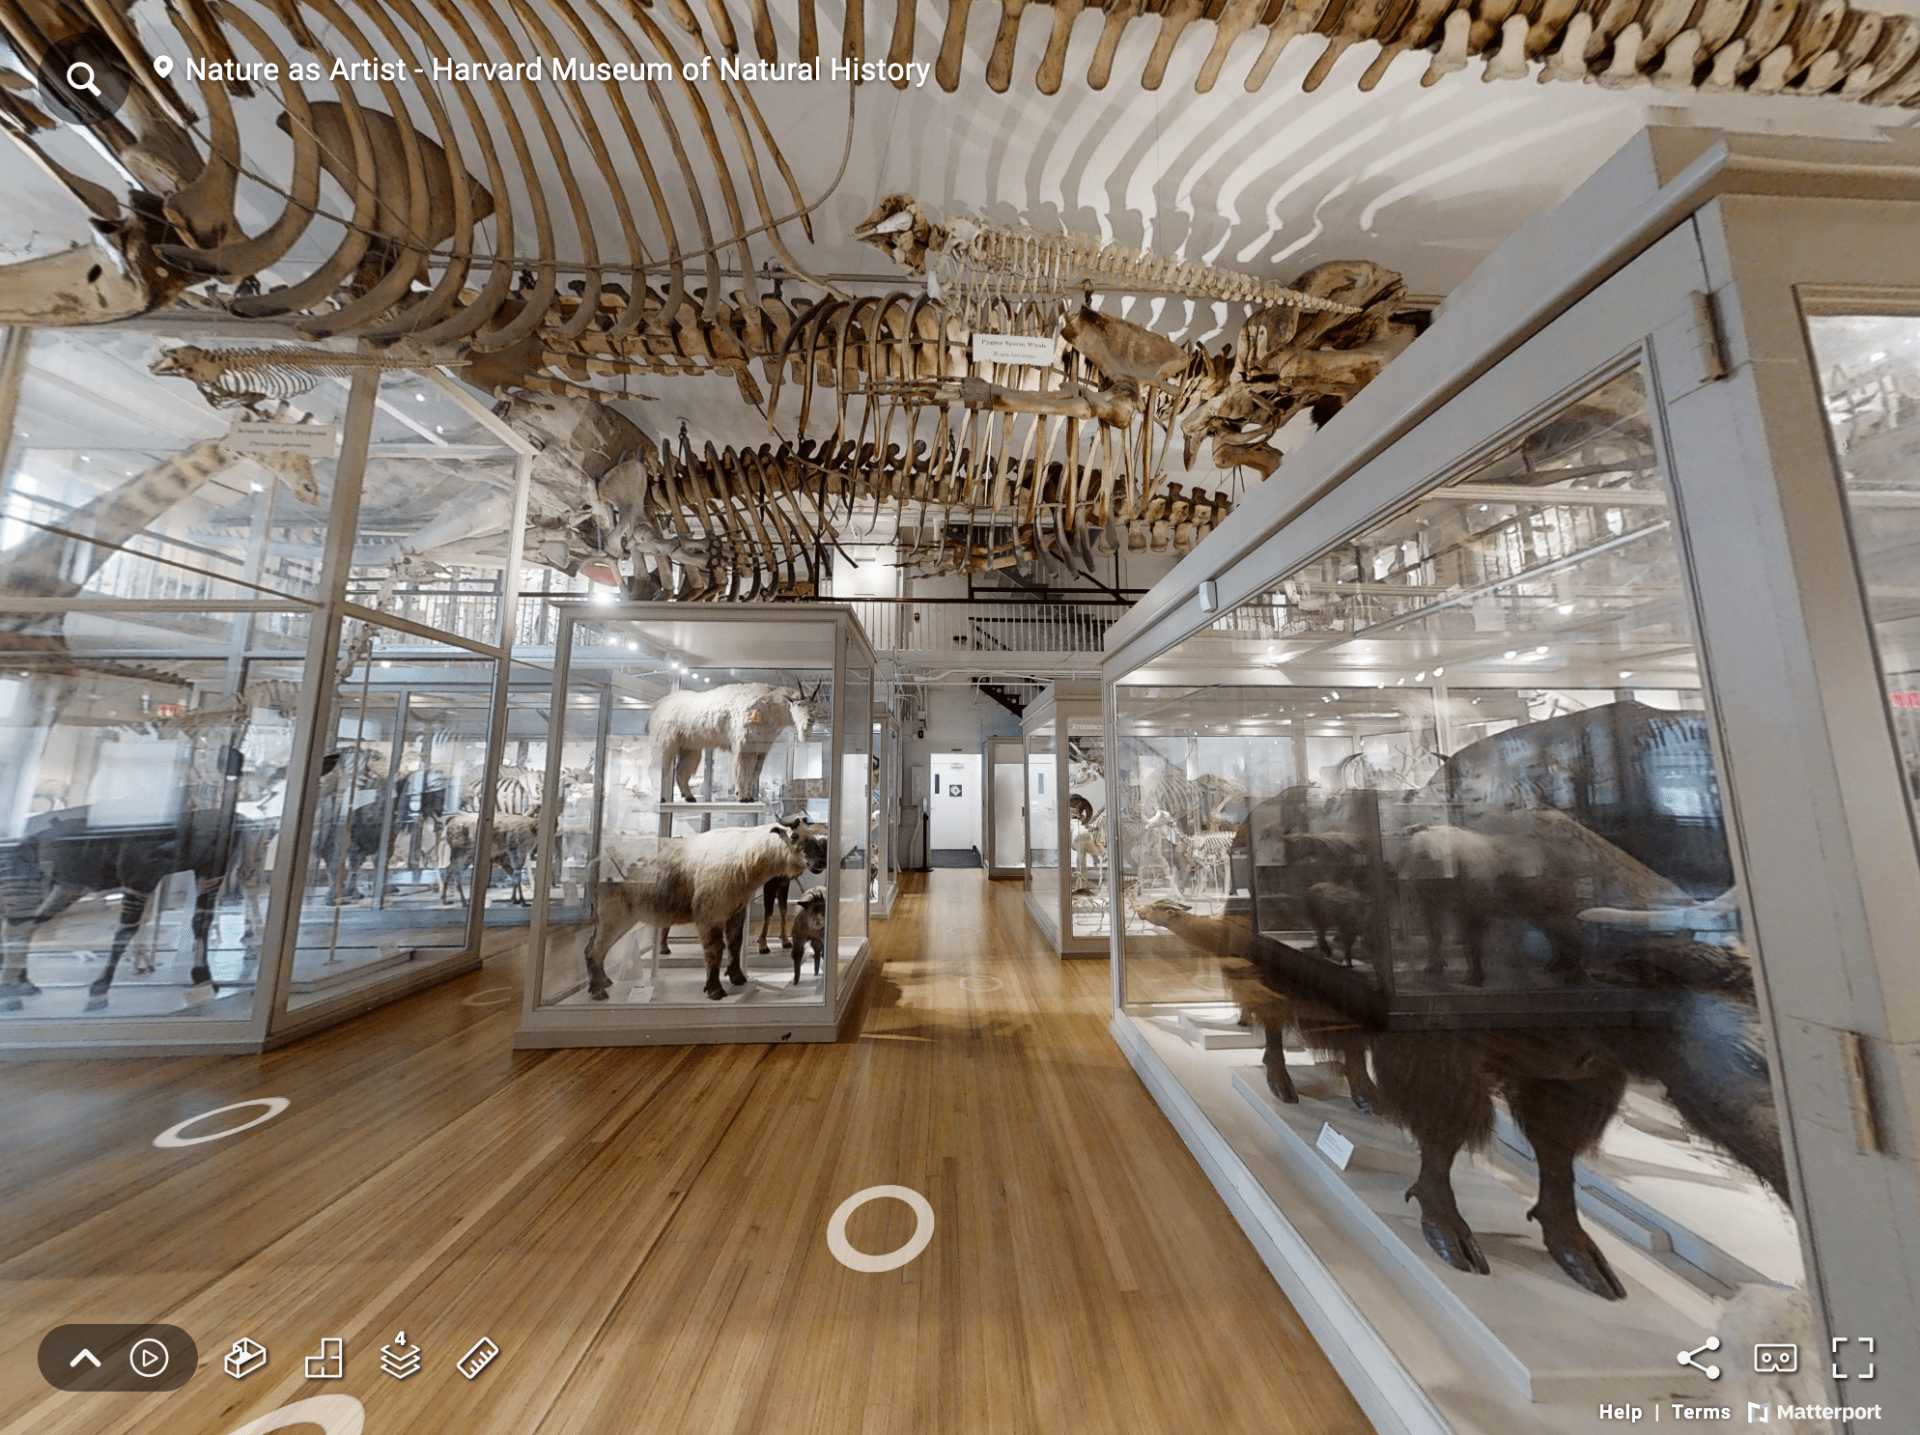 Museum gallery filled with taxidermy animals and whale skeletons